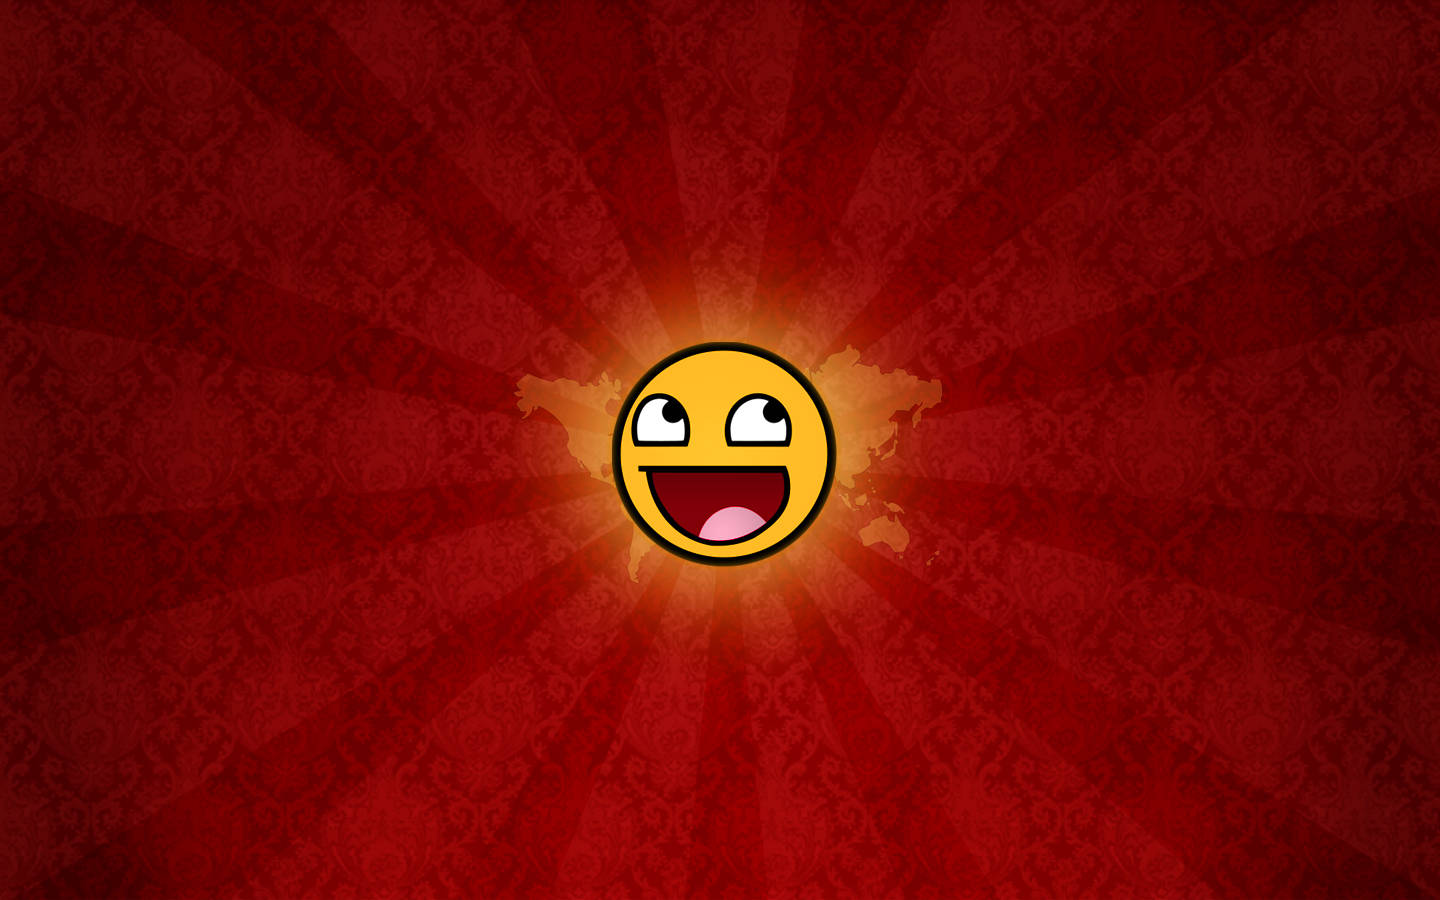 smiley awesome face 1920x1200 wallpaper digital awesome face hd art hd